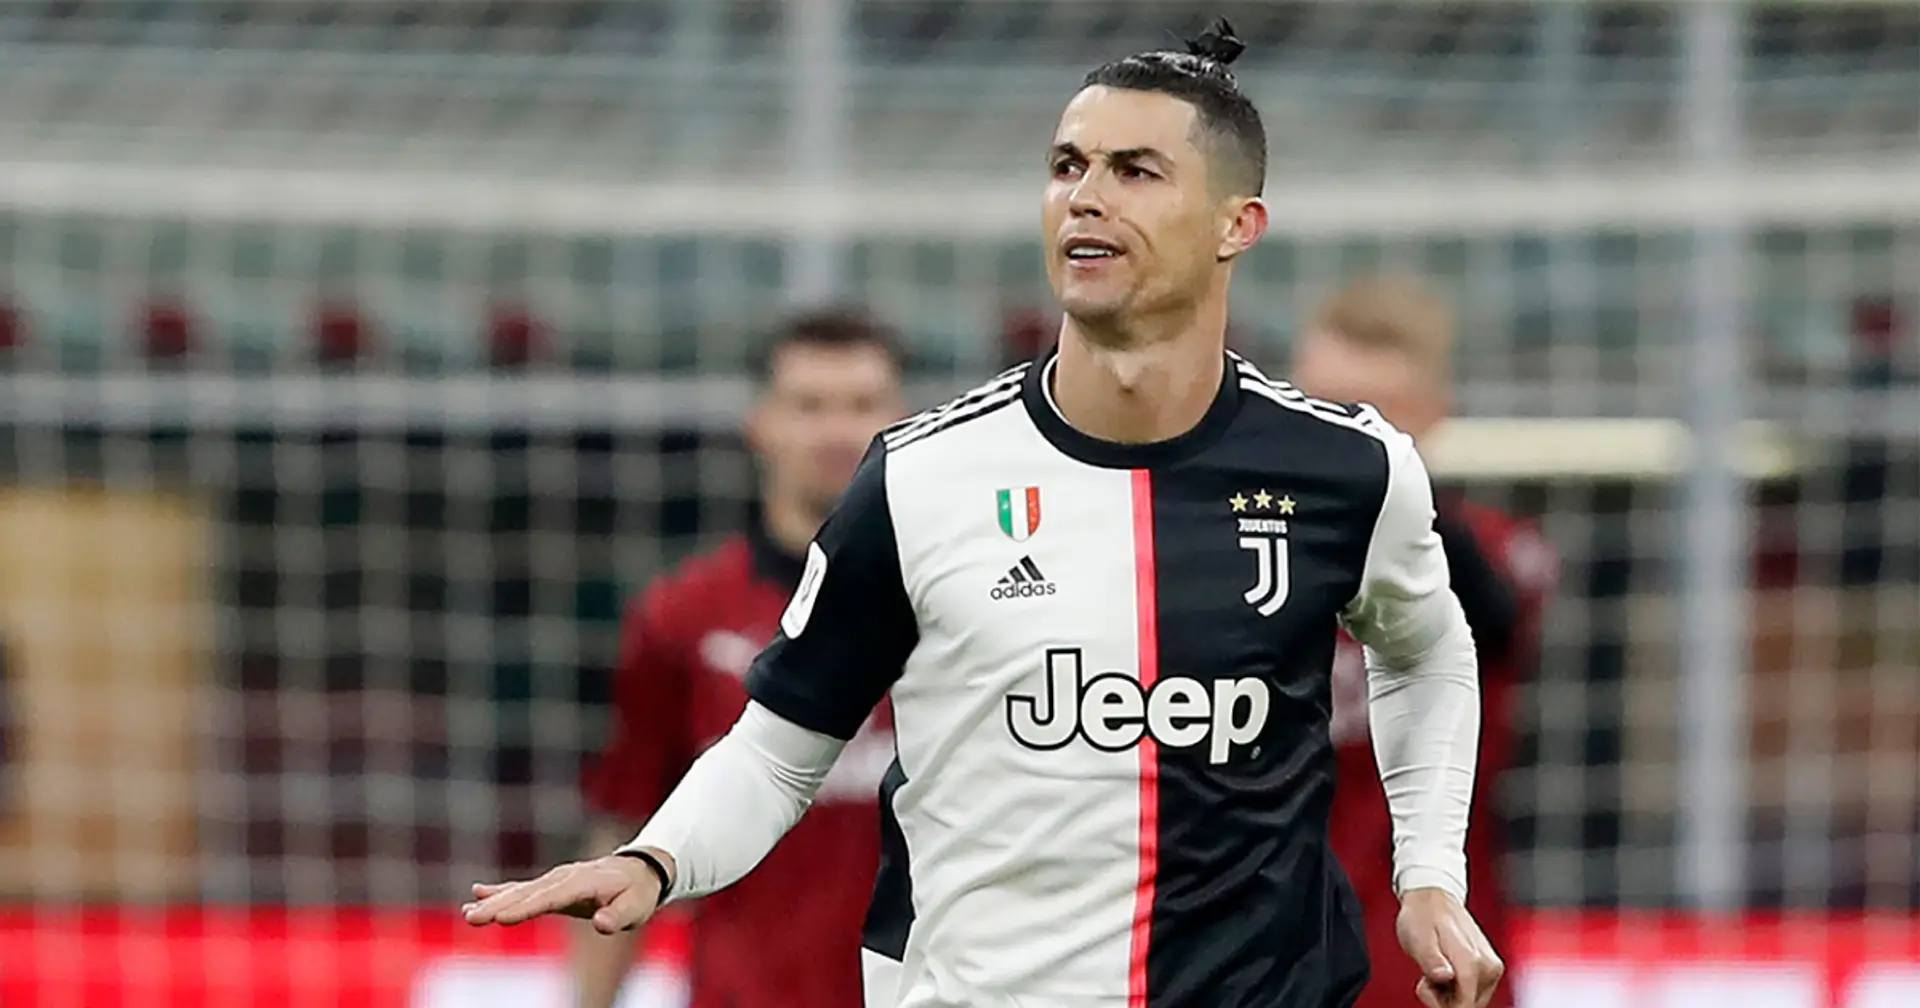 Cristiano Ronaldo sues Juventus, seeks over £17 million in unpaid wages